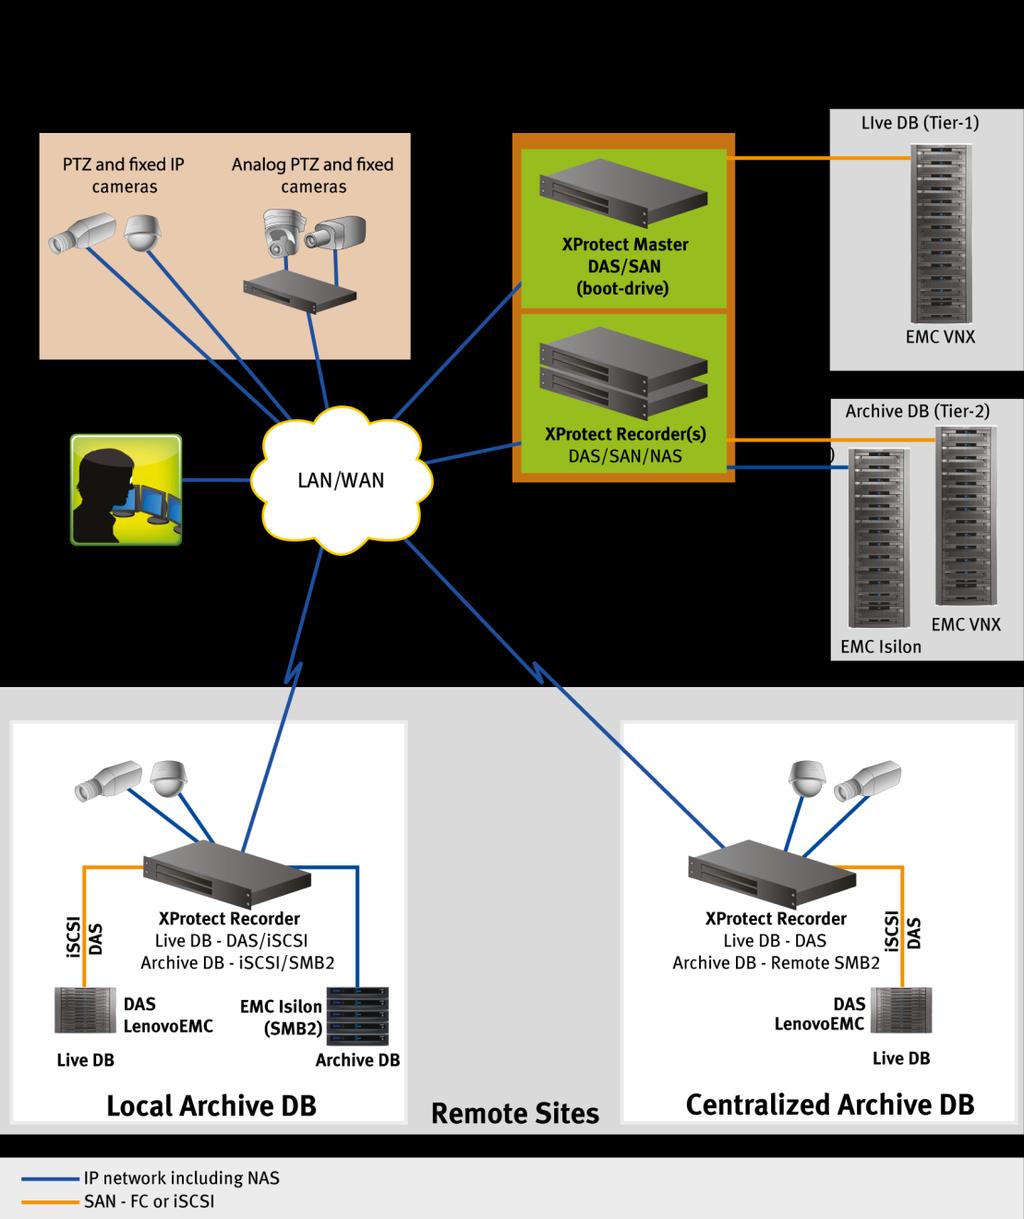 Solution architecture Architecture diagram This solution validates the Milestone XProtect video surveillance infrastructure enabled by EMC storage.